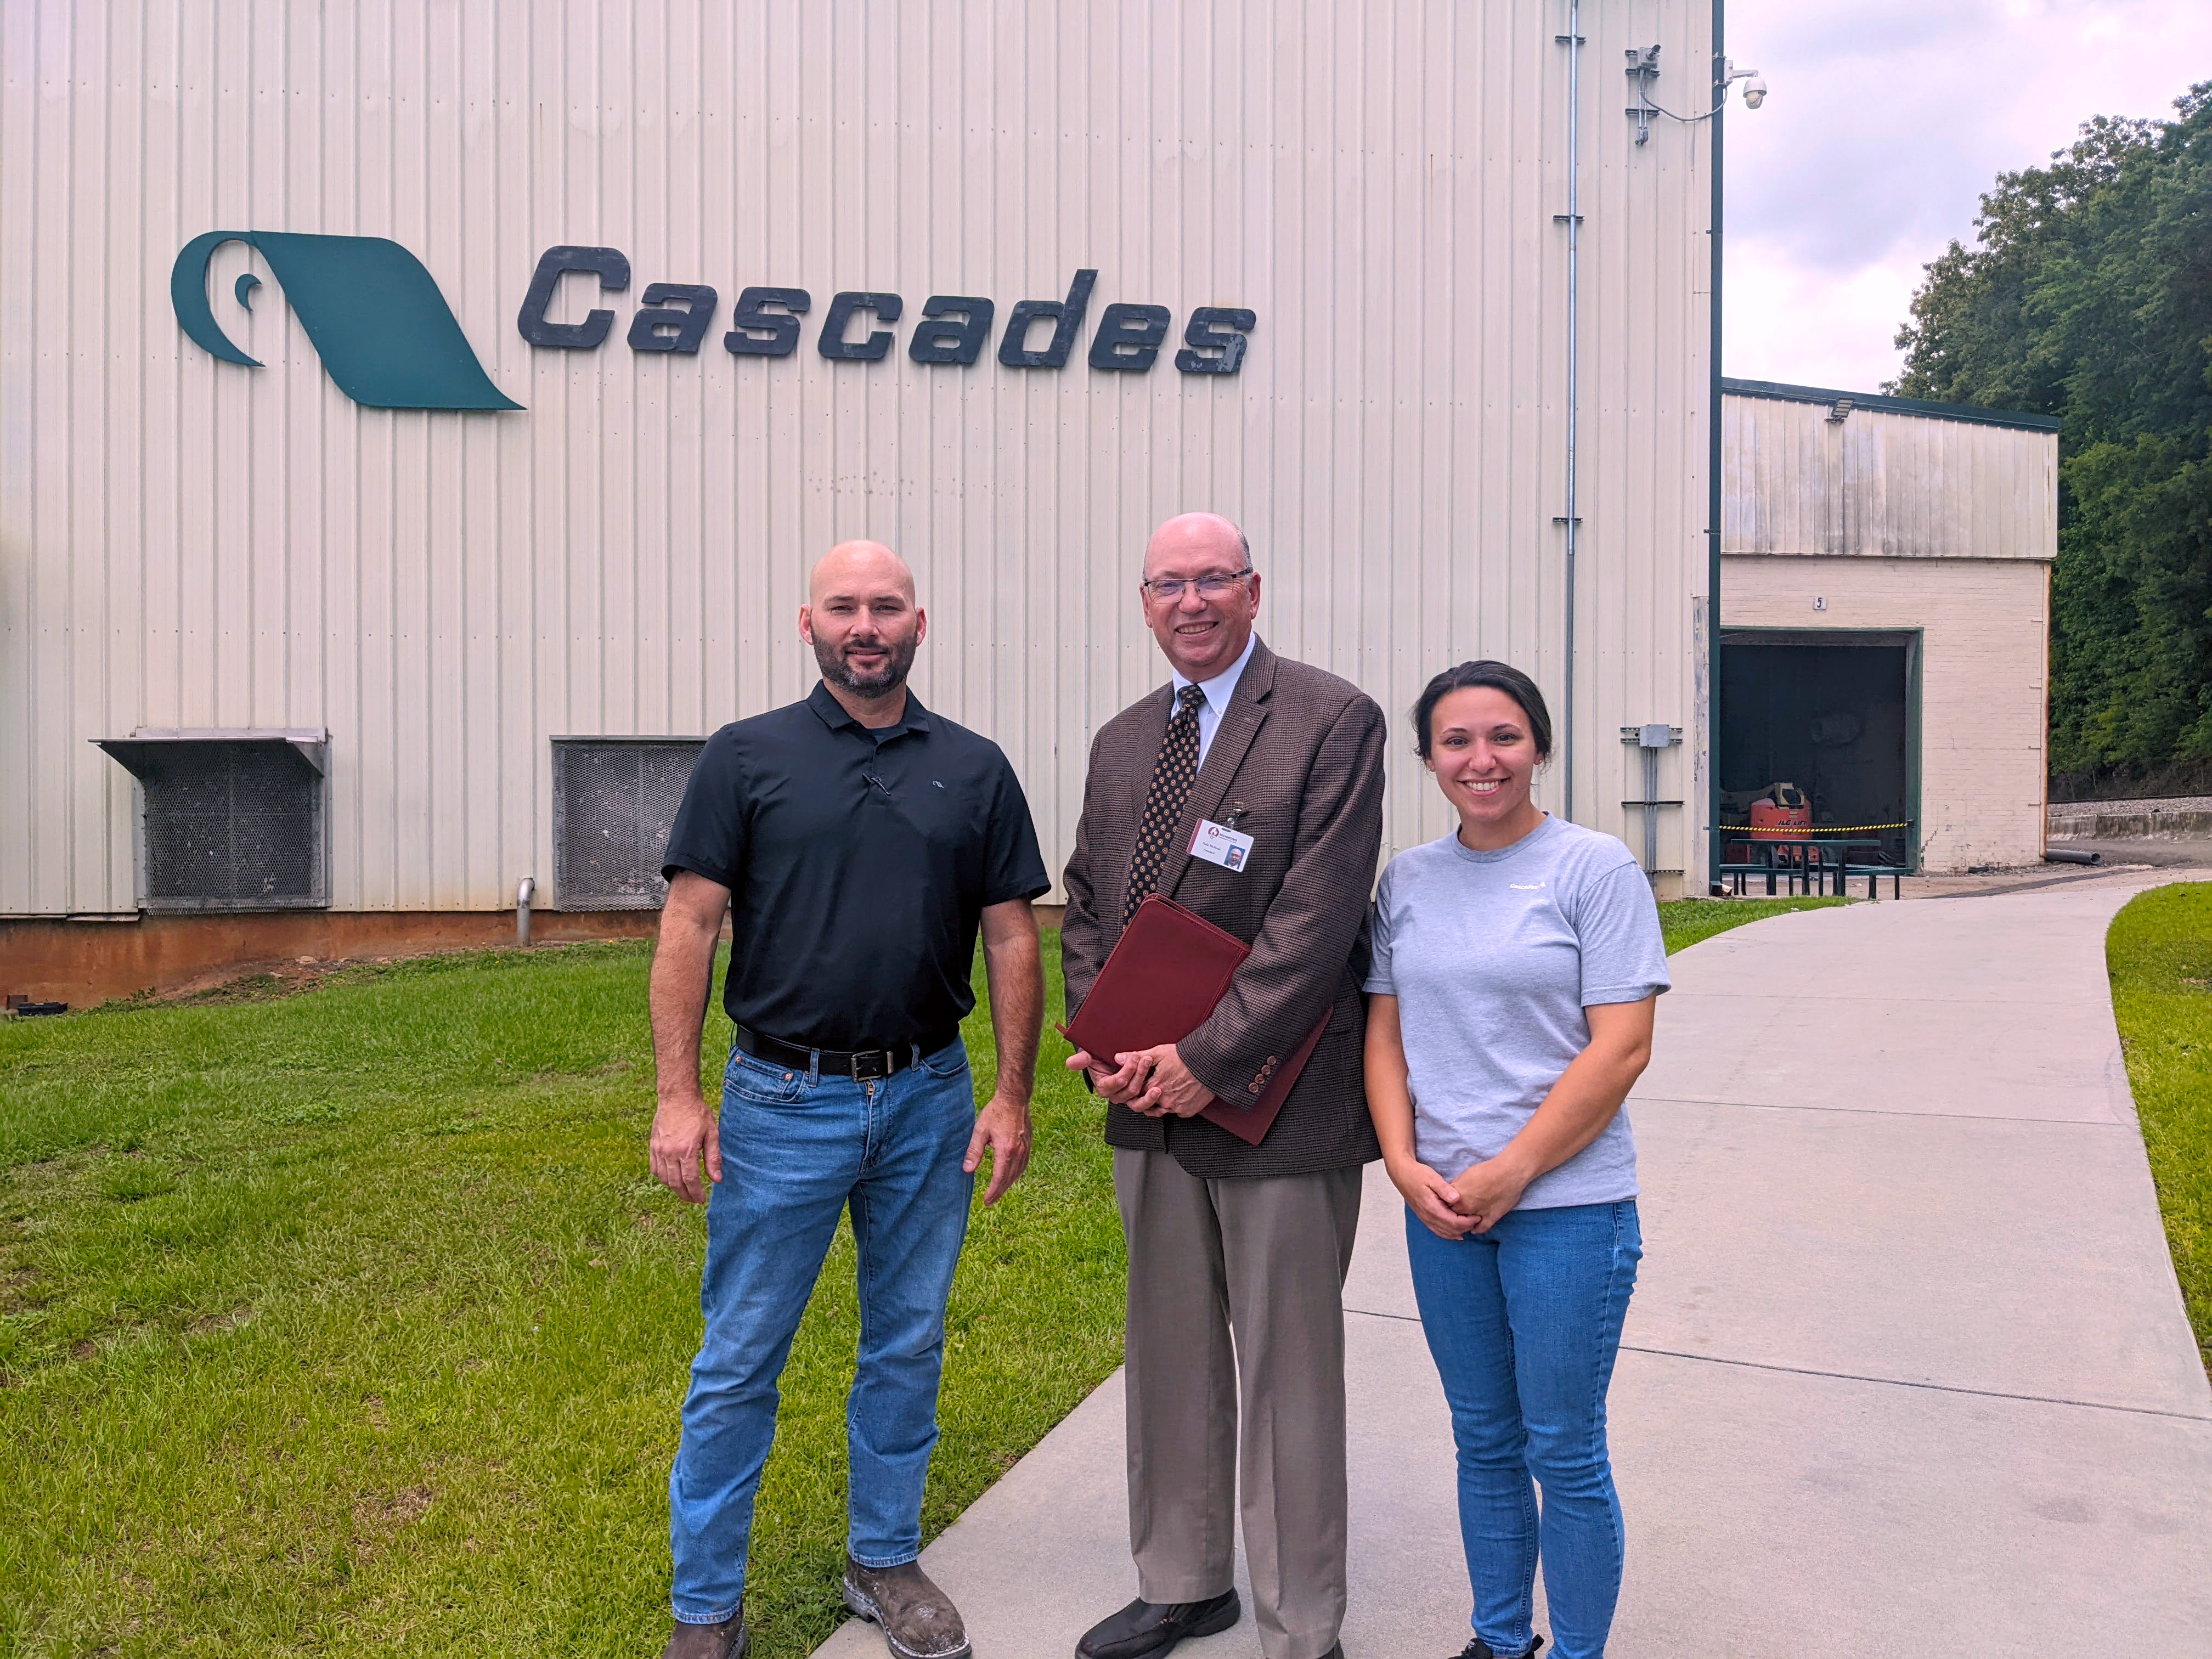 Cascades employees stand with Dr. McInnis in front of Cascades